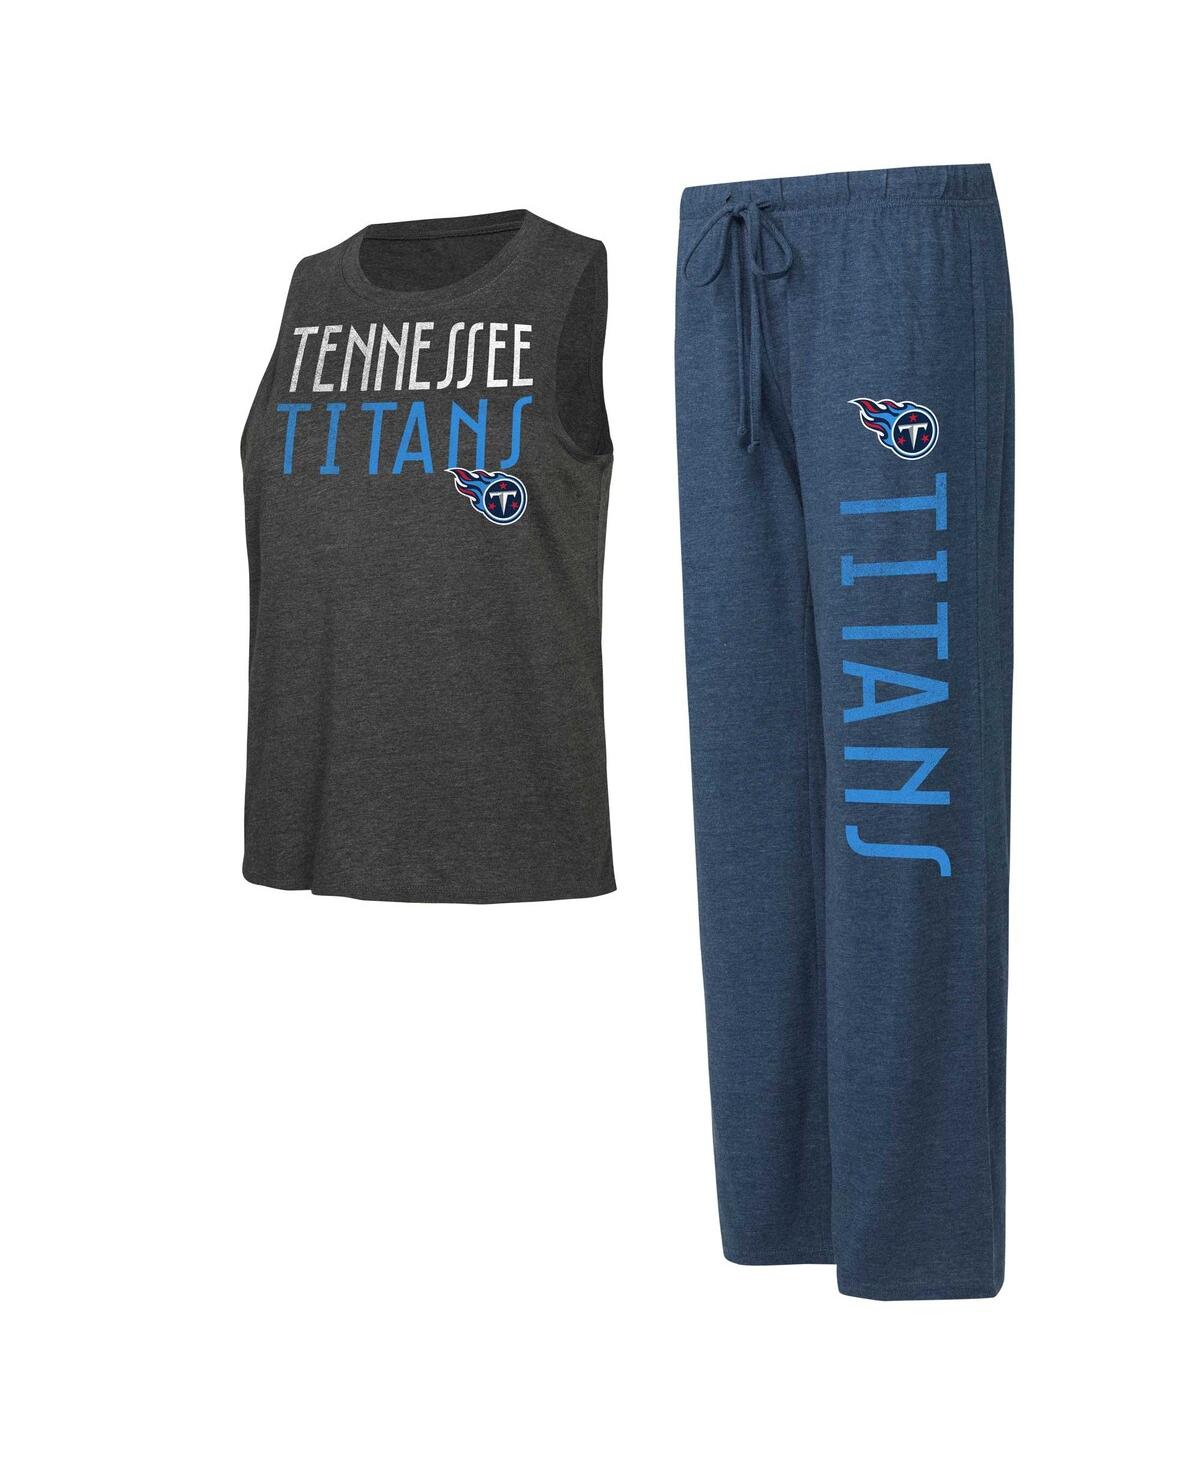 Women's Concepts Sport Navy, Charcoal Distressed Tennessee Titans Muscle Tank Top and Pants Lounge Set - Navy, Charcoal